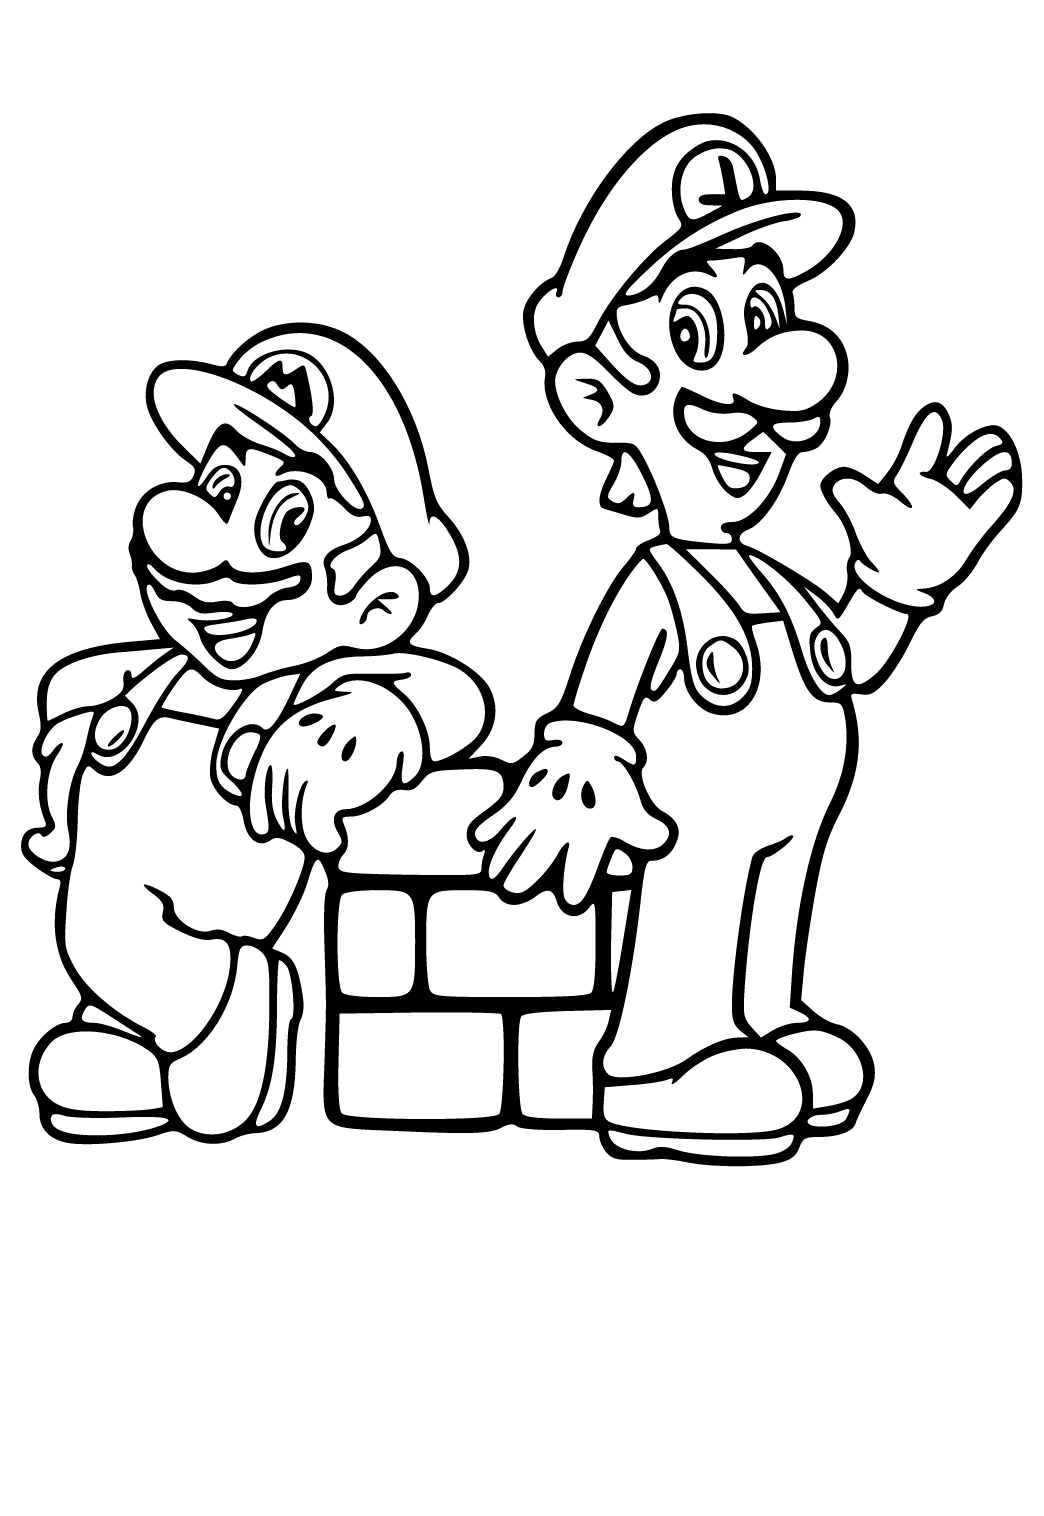 Free printable super mario luigi coloring page sheet and picture for adults and kids girls and boys